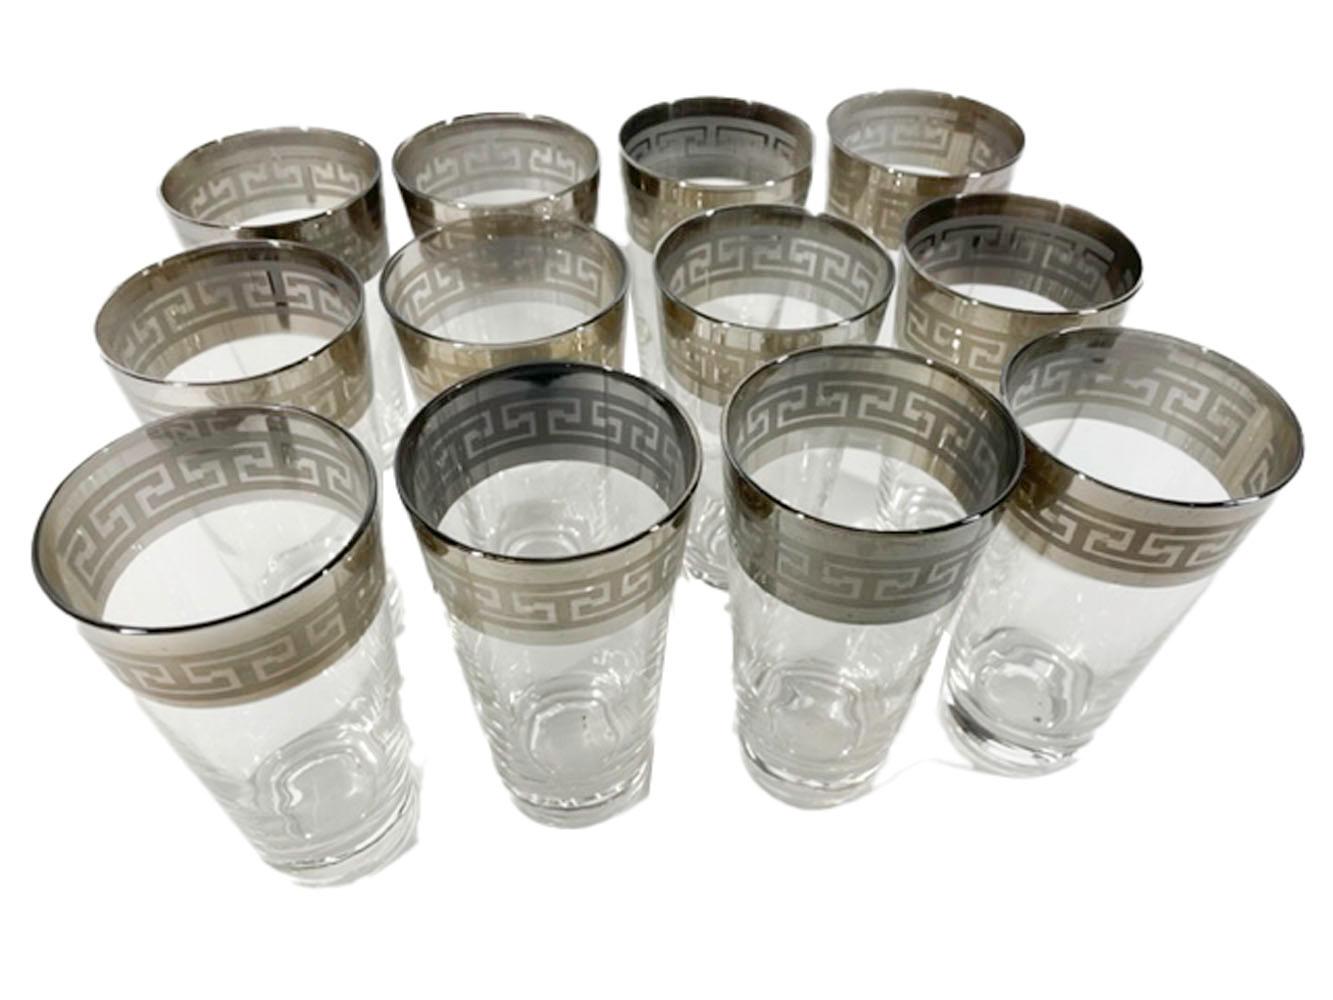 Twelve Mid-Century Modern highball or water glasses in the manner of Dorothy Thorpe, with a wide silver band at the top embossed with a Greek key motif.